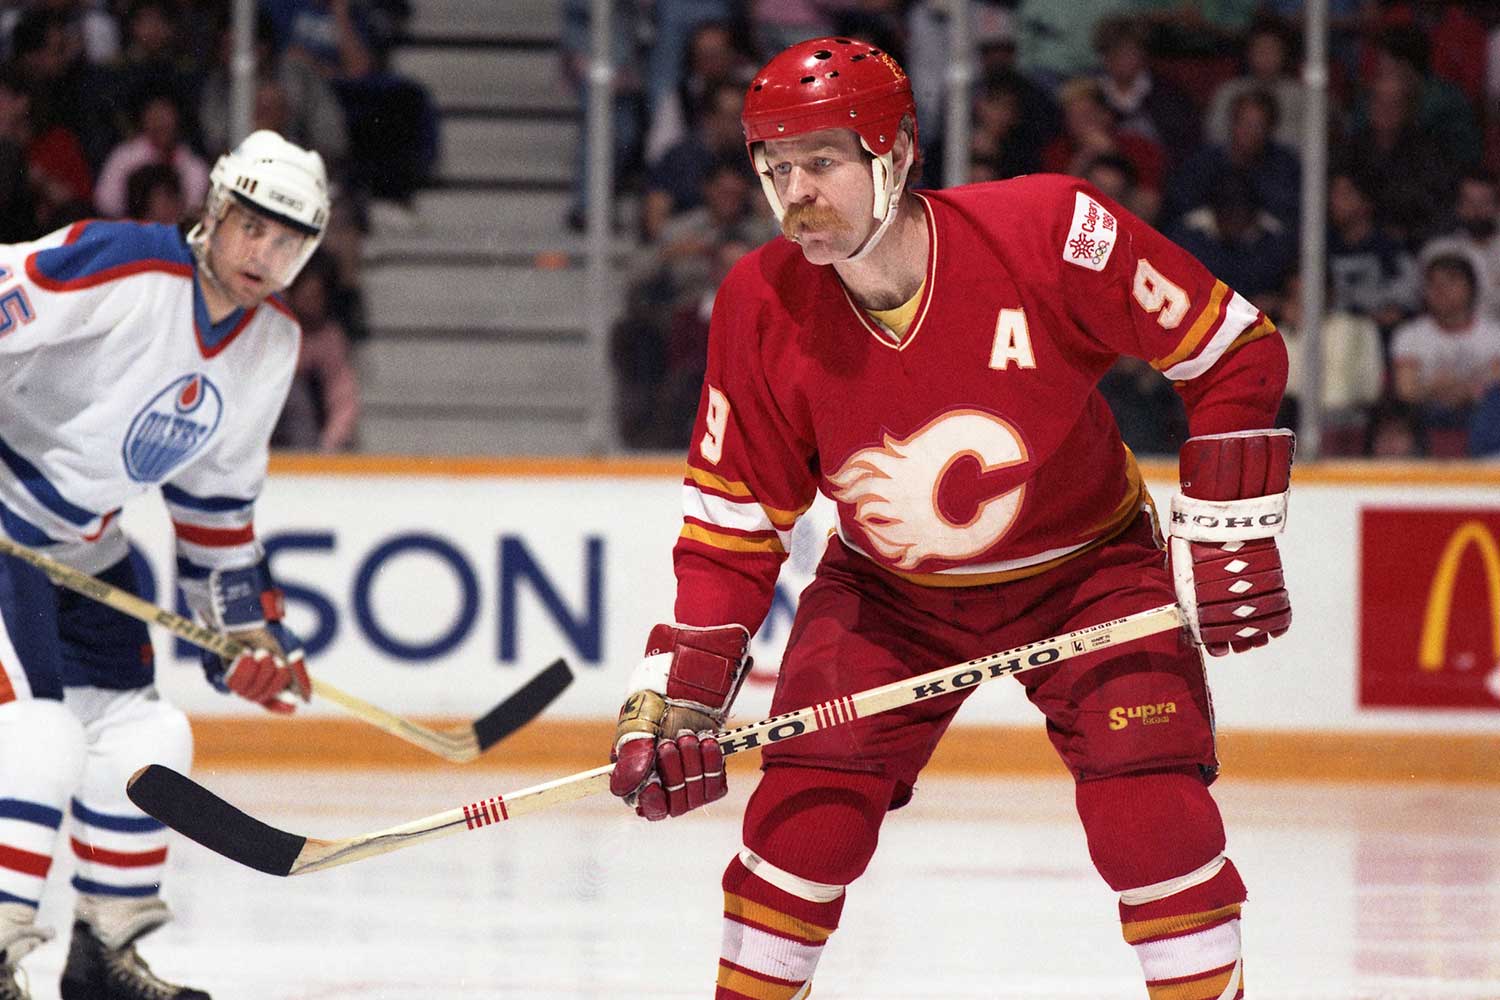 Remembering the Calgary Flames' 1989 Stanley Cup run